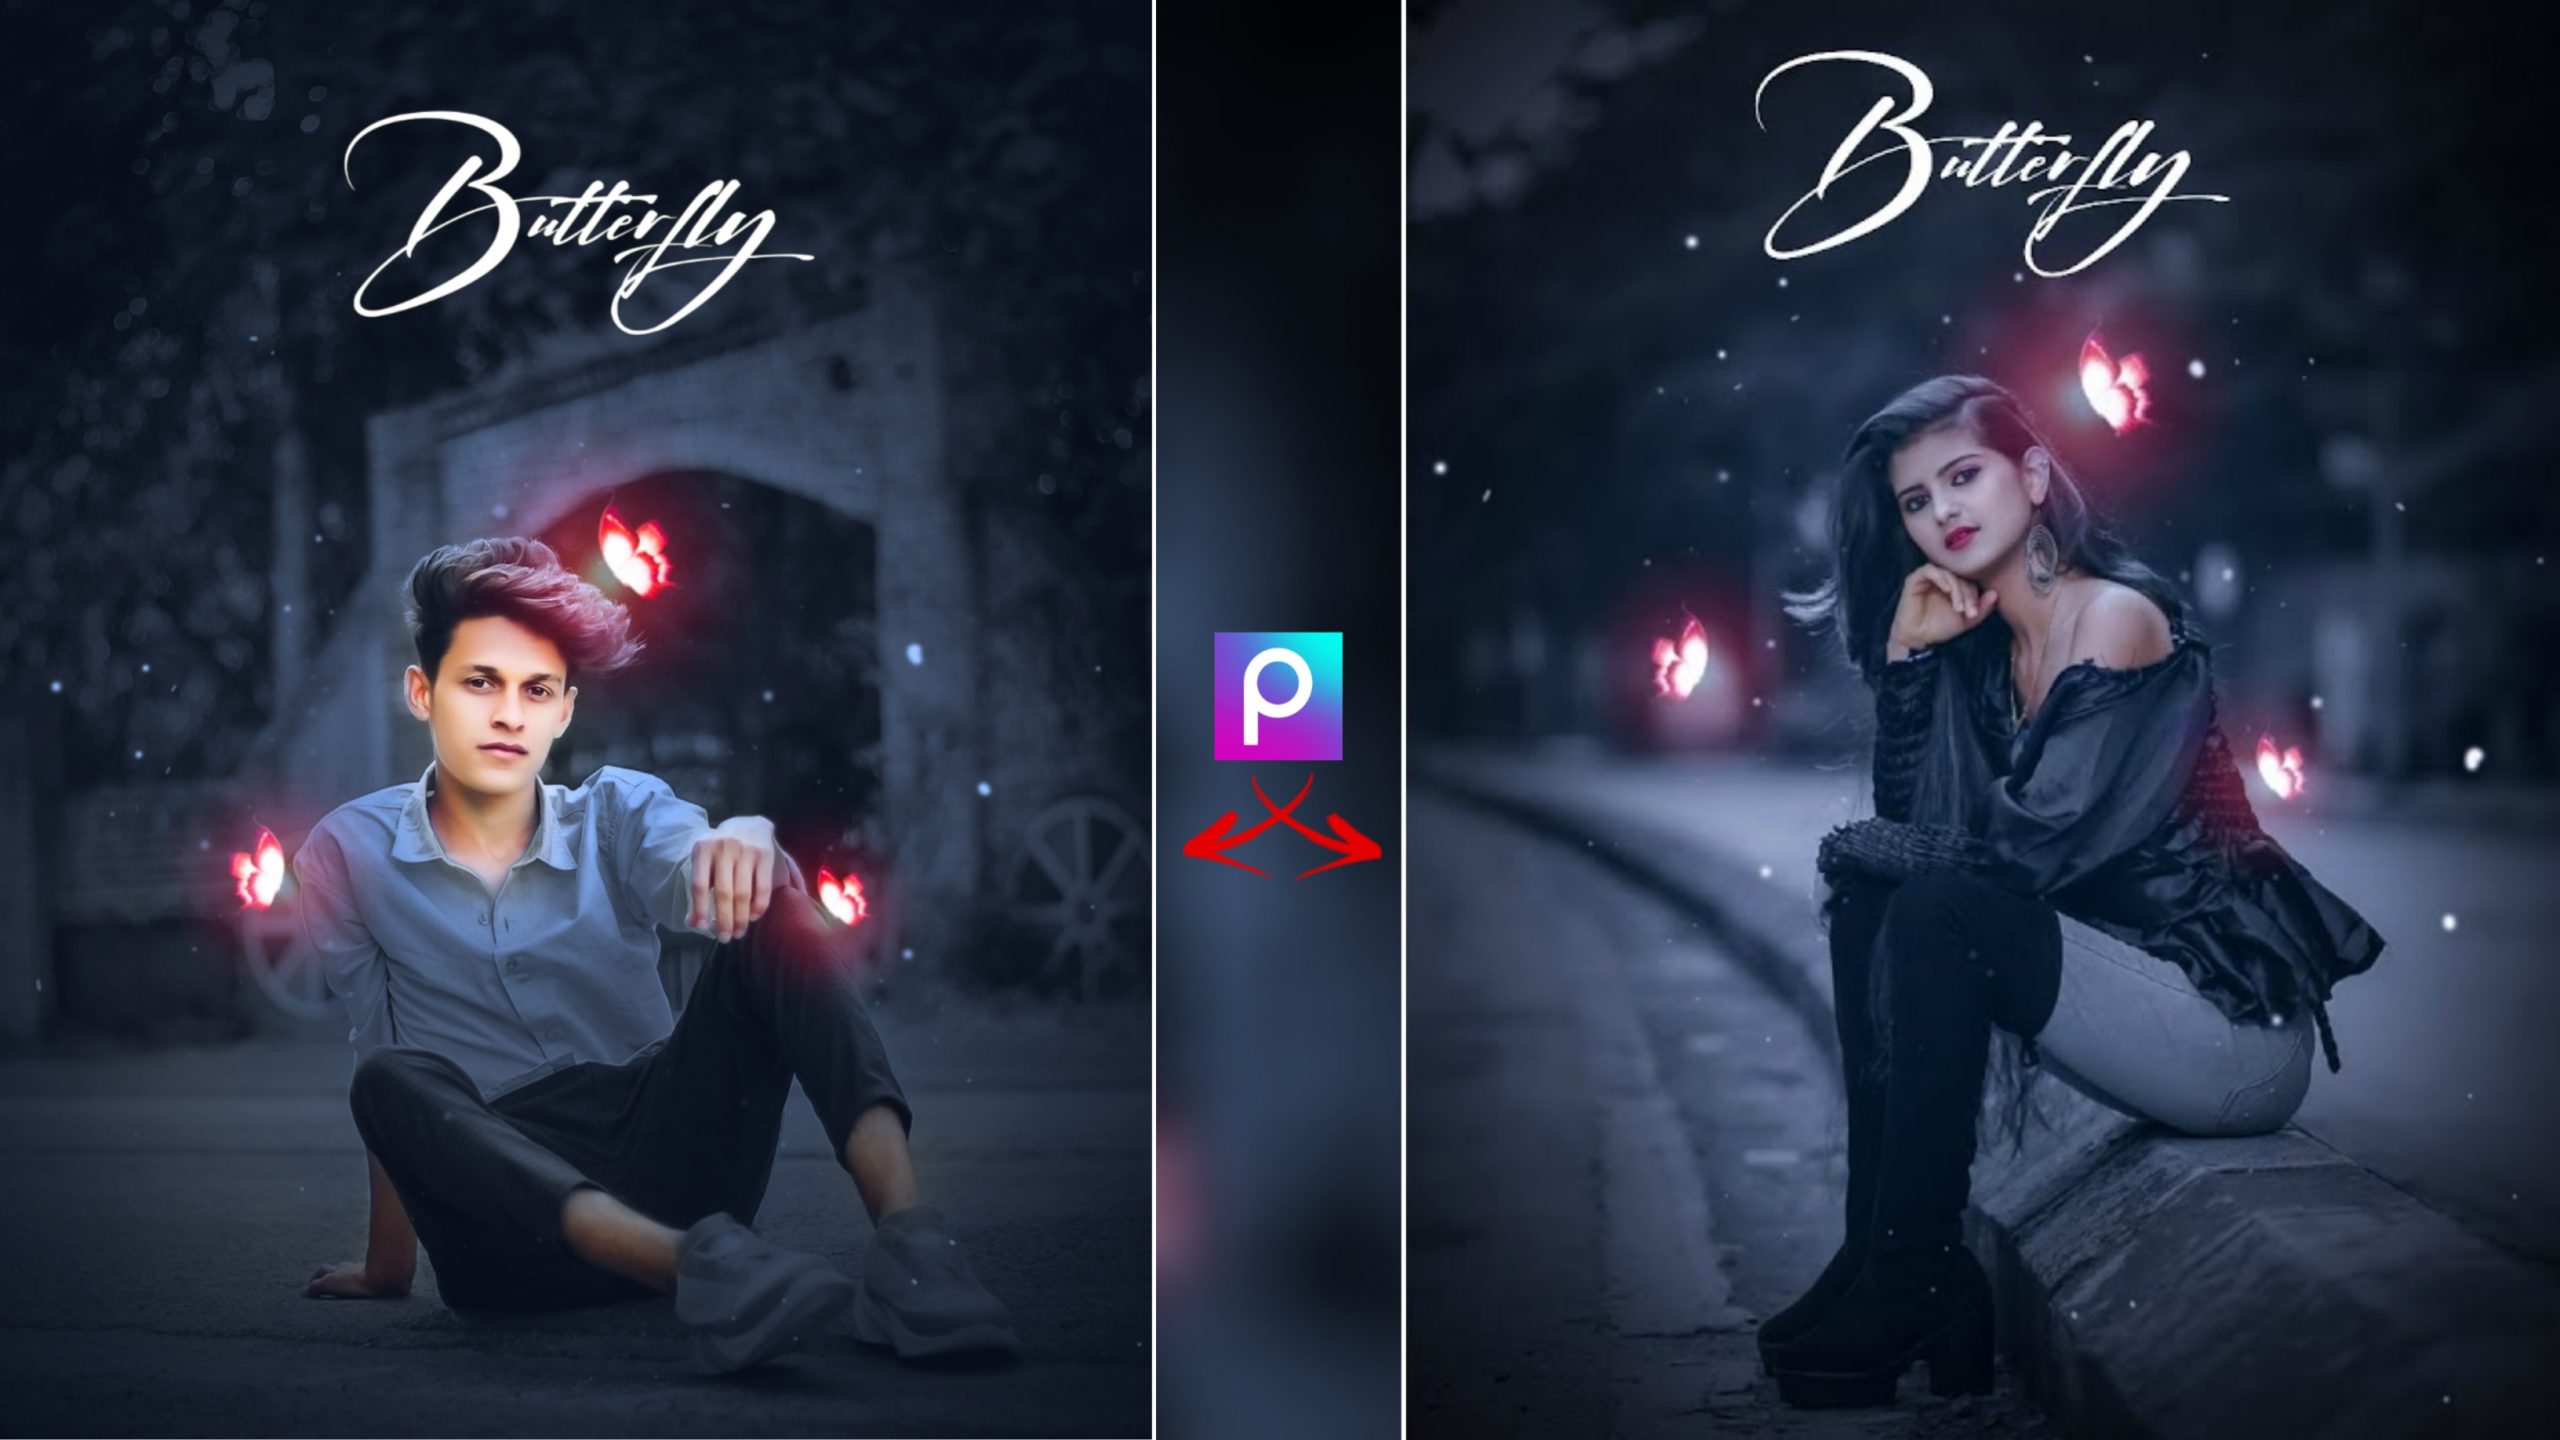 New 500 HD Editing Backgrounds For Picsart  Photoshop  New background  images Best background images Blur background photography